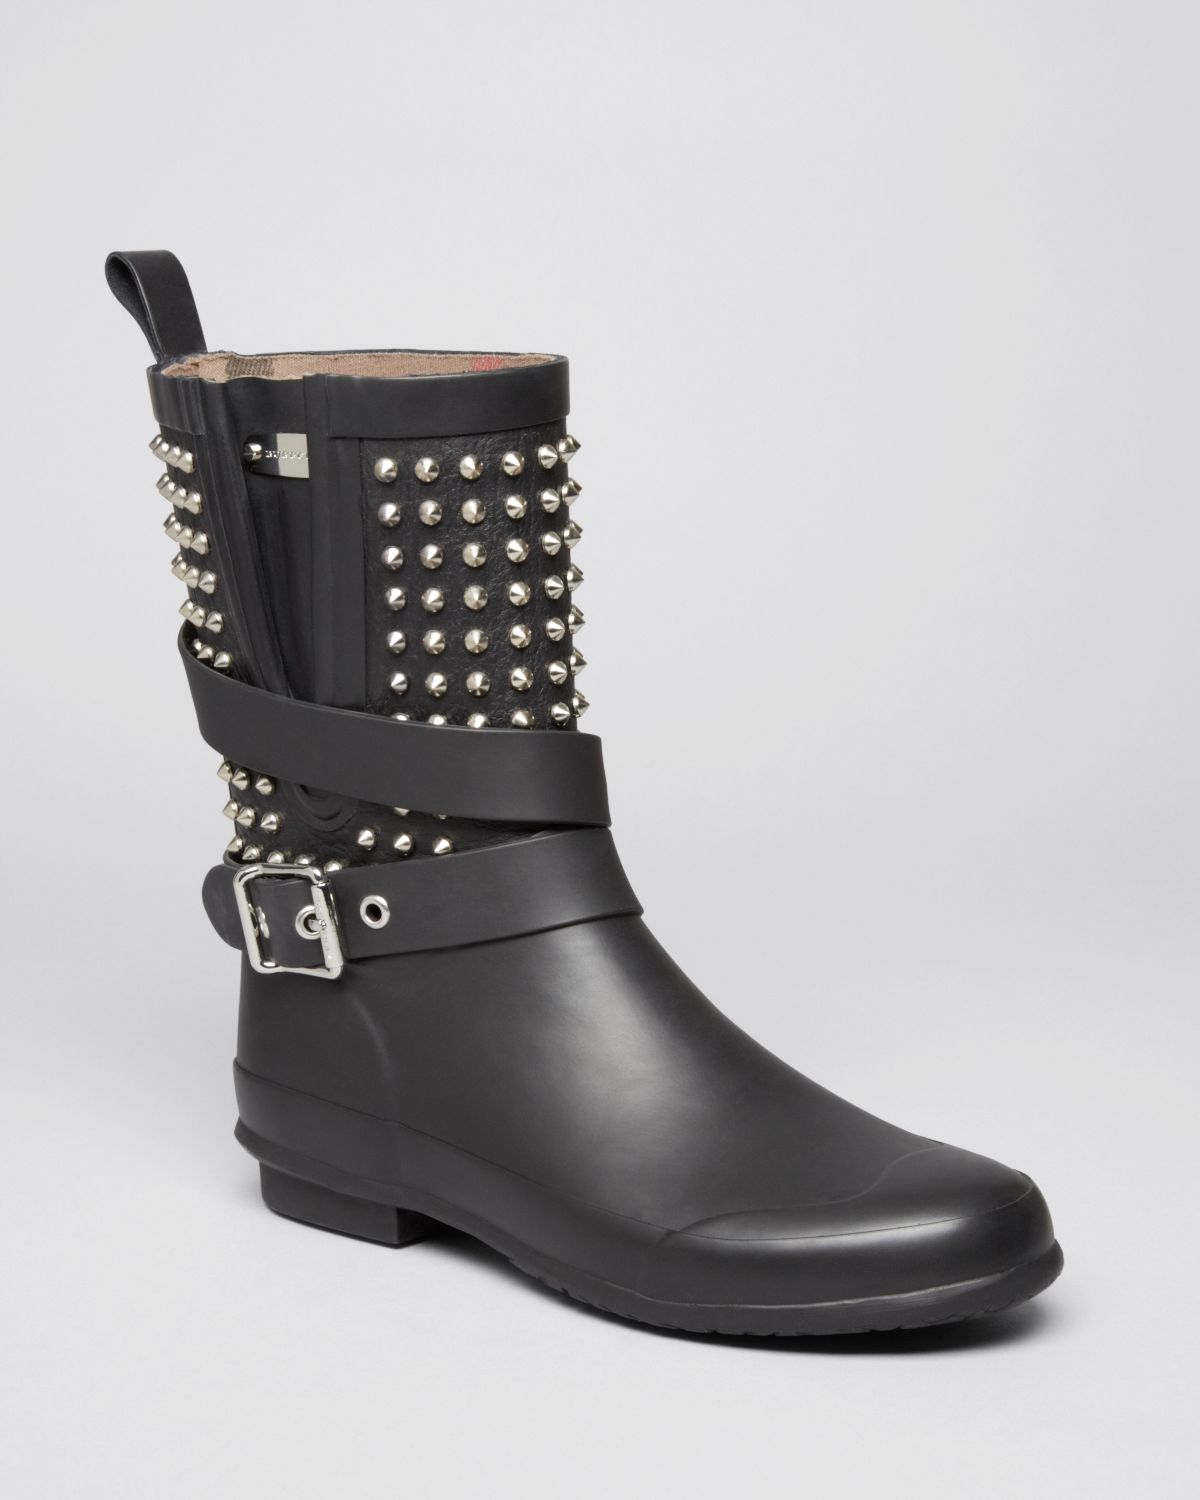 Burberry Rain Boots Holloway Studded in 